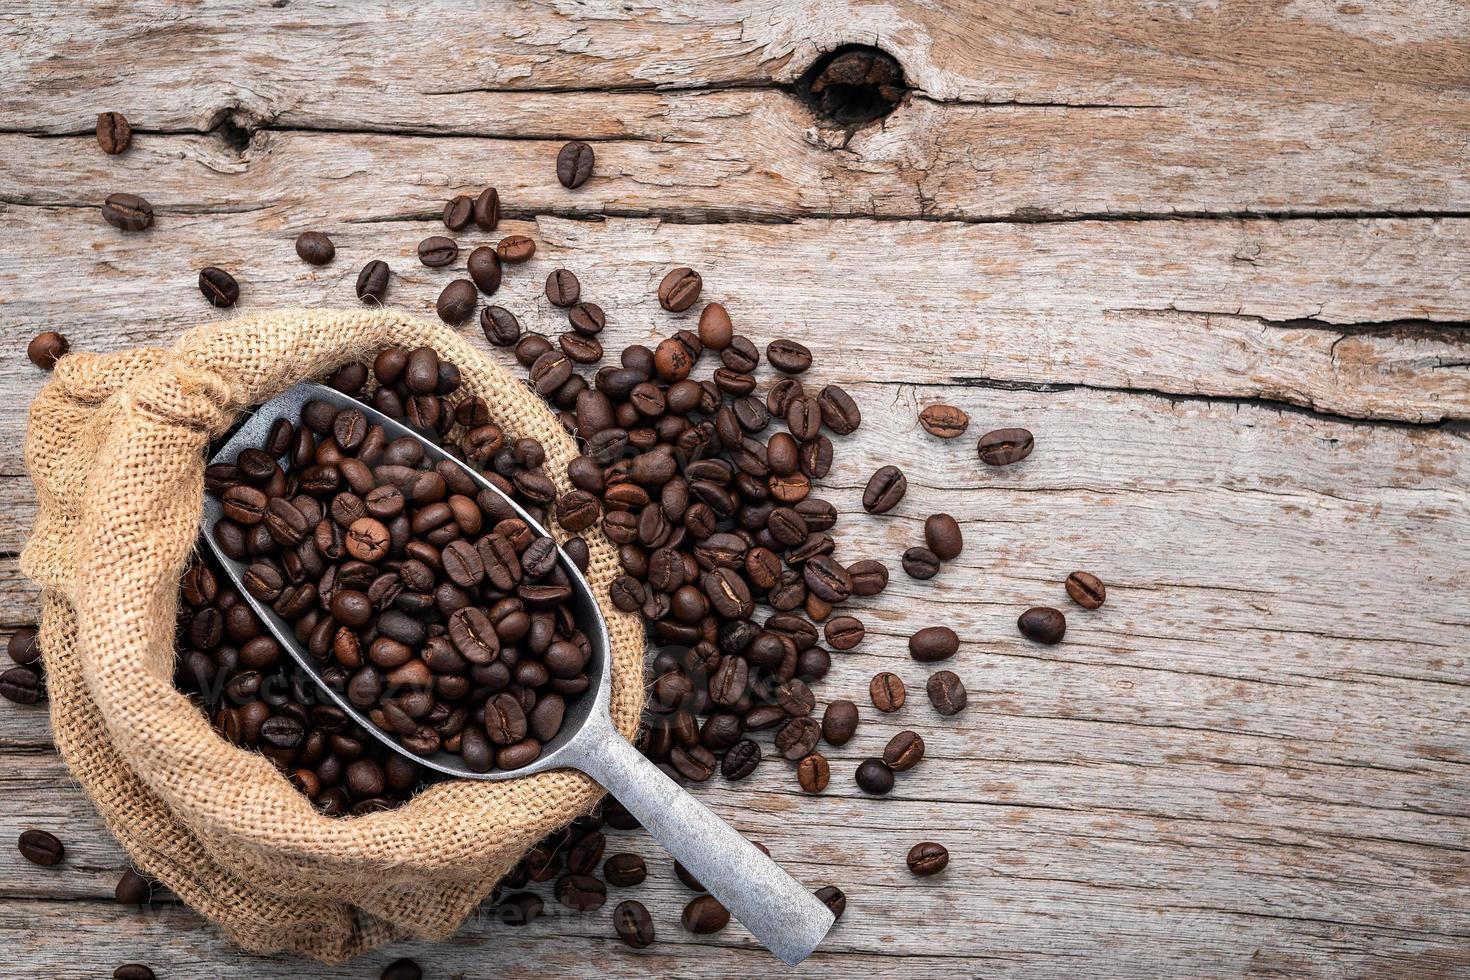 Background of dark roasted coffee beans with scoops setup on wooden background with copy space. photo